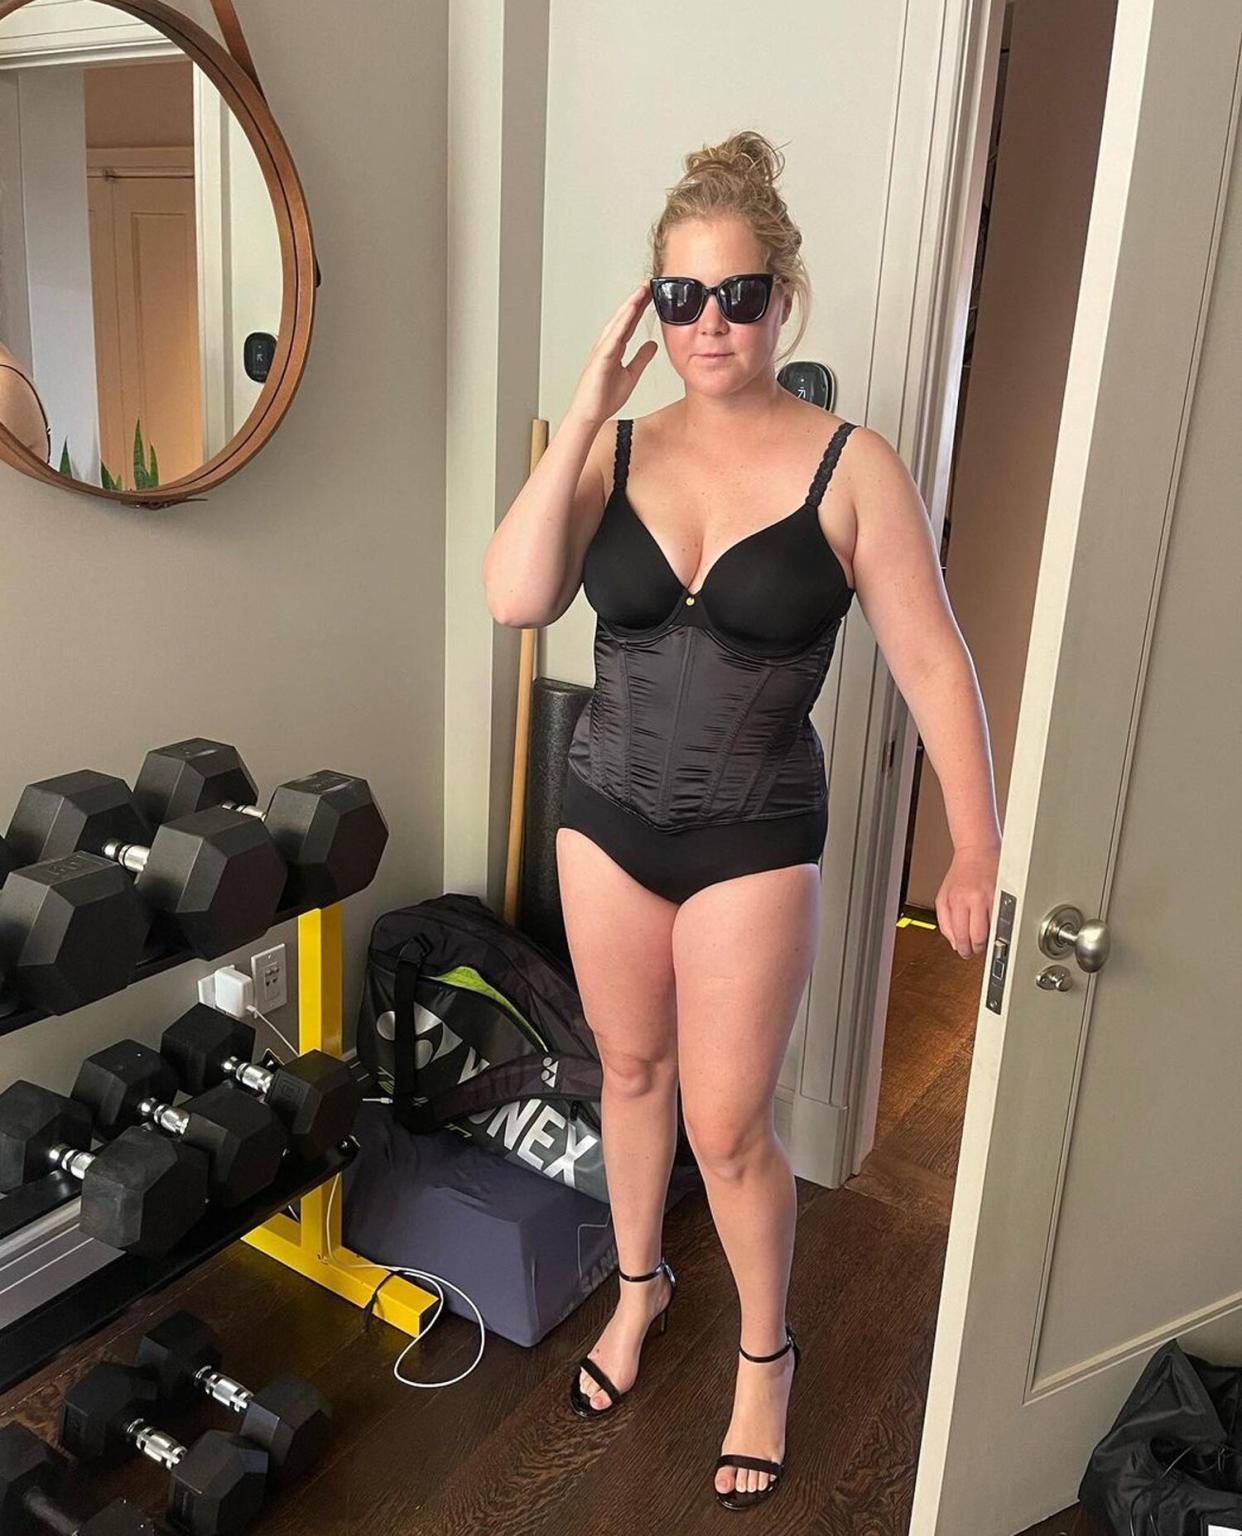 Amy Schumer Is 'Trying to Be Healthy' After Hysterectomy, Liposuction: 'I Want to Feel Hot'